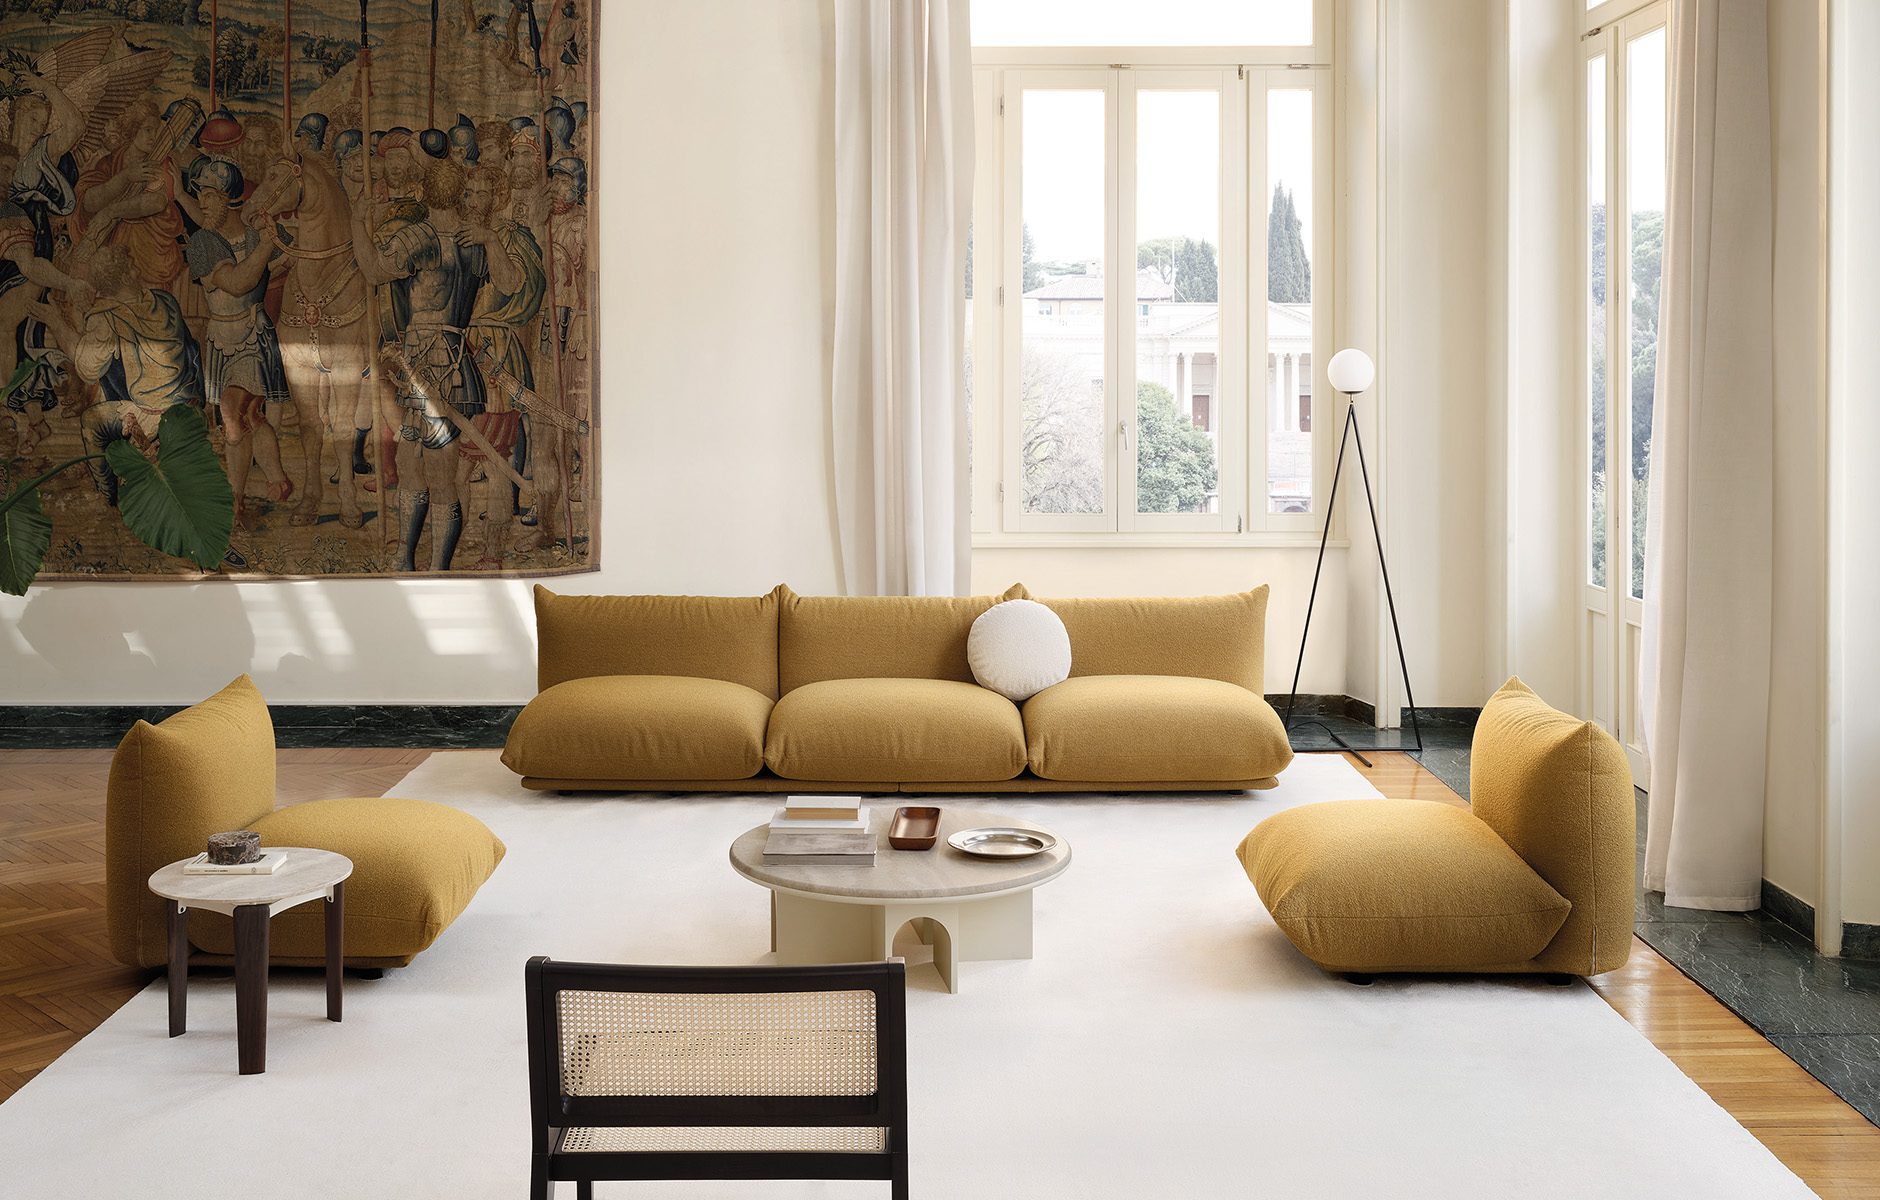 The Marenco sofa designed by Mario Marenco in 1970 released in an edition without arms in 2022. The collection joins the Marenco outdoor collection. Photo c/o Arflex. 